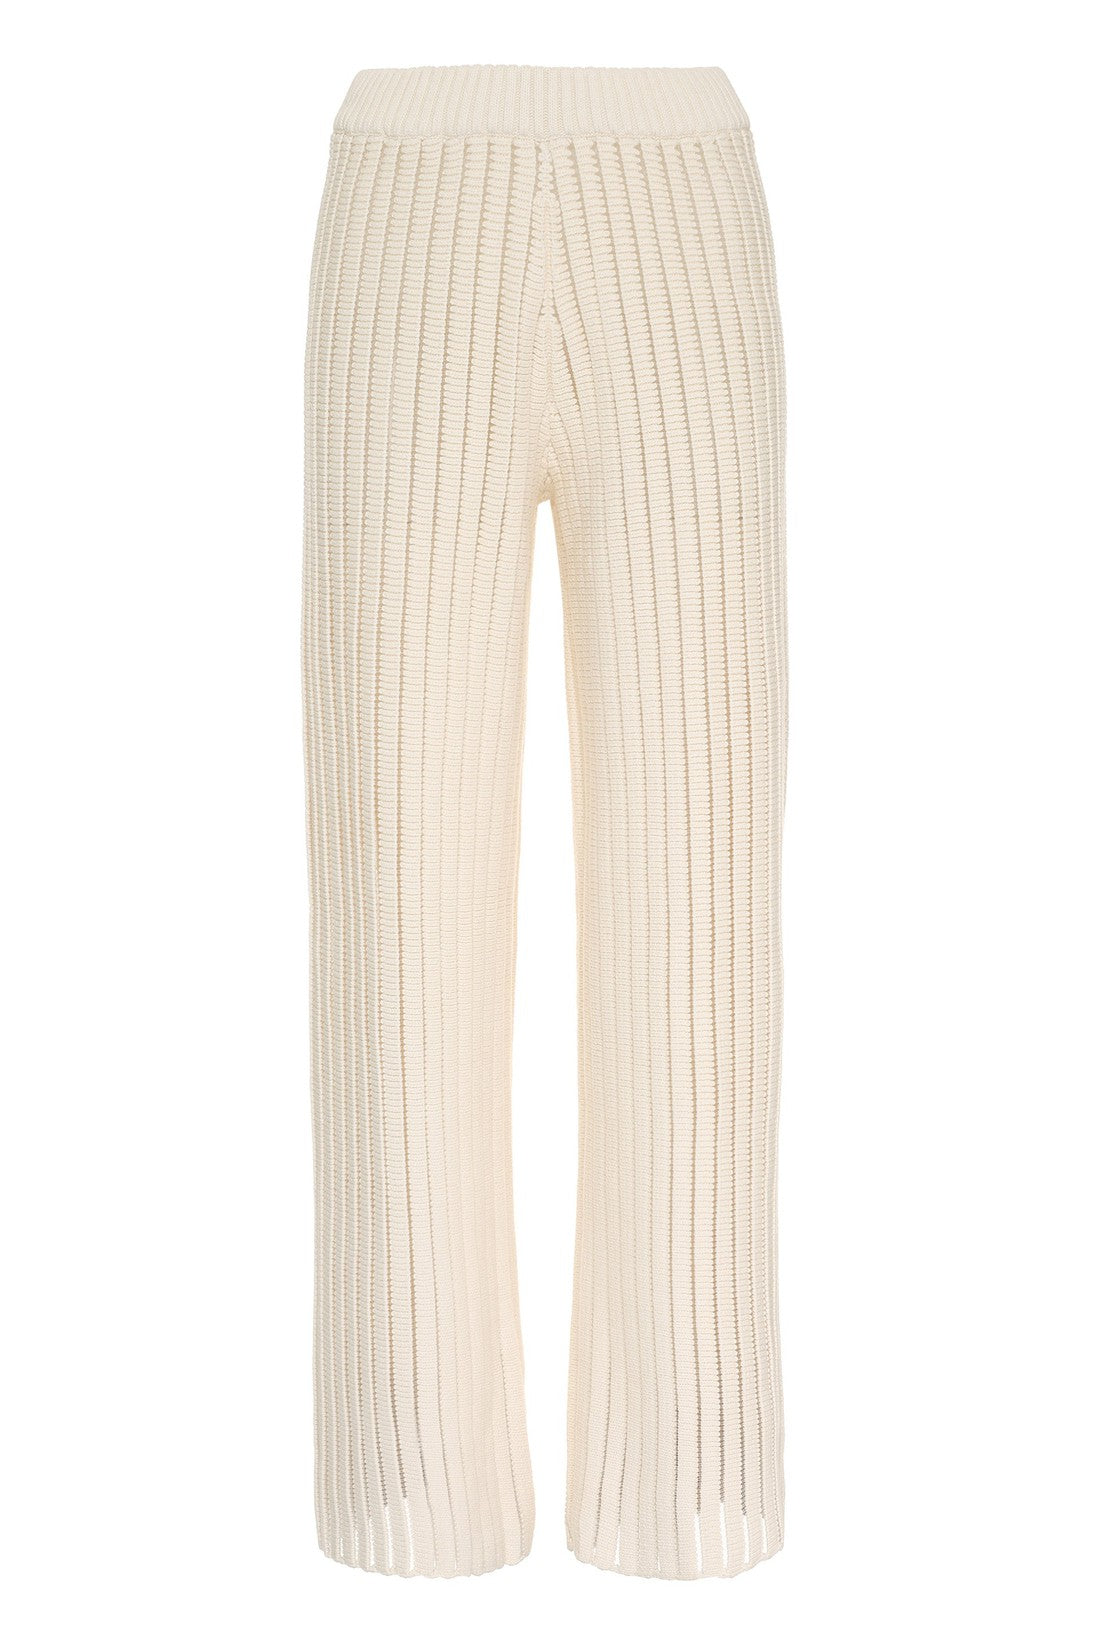 Fabiana Filippi-OUTLET-SALE-Wide leg knitted trousers-ARCHIVIST